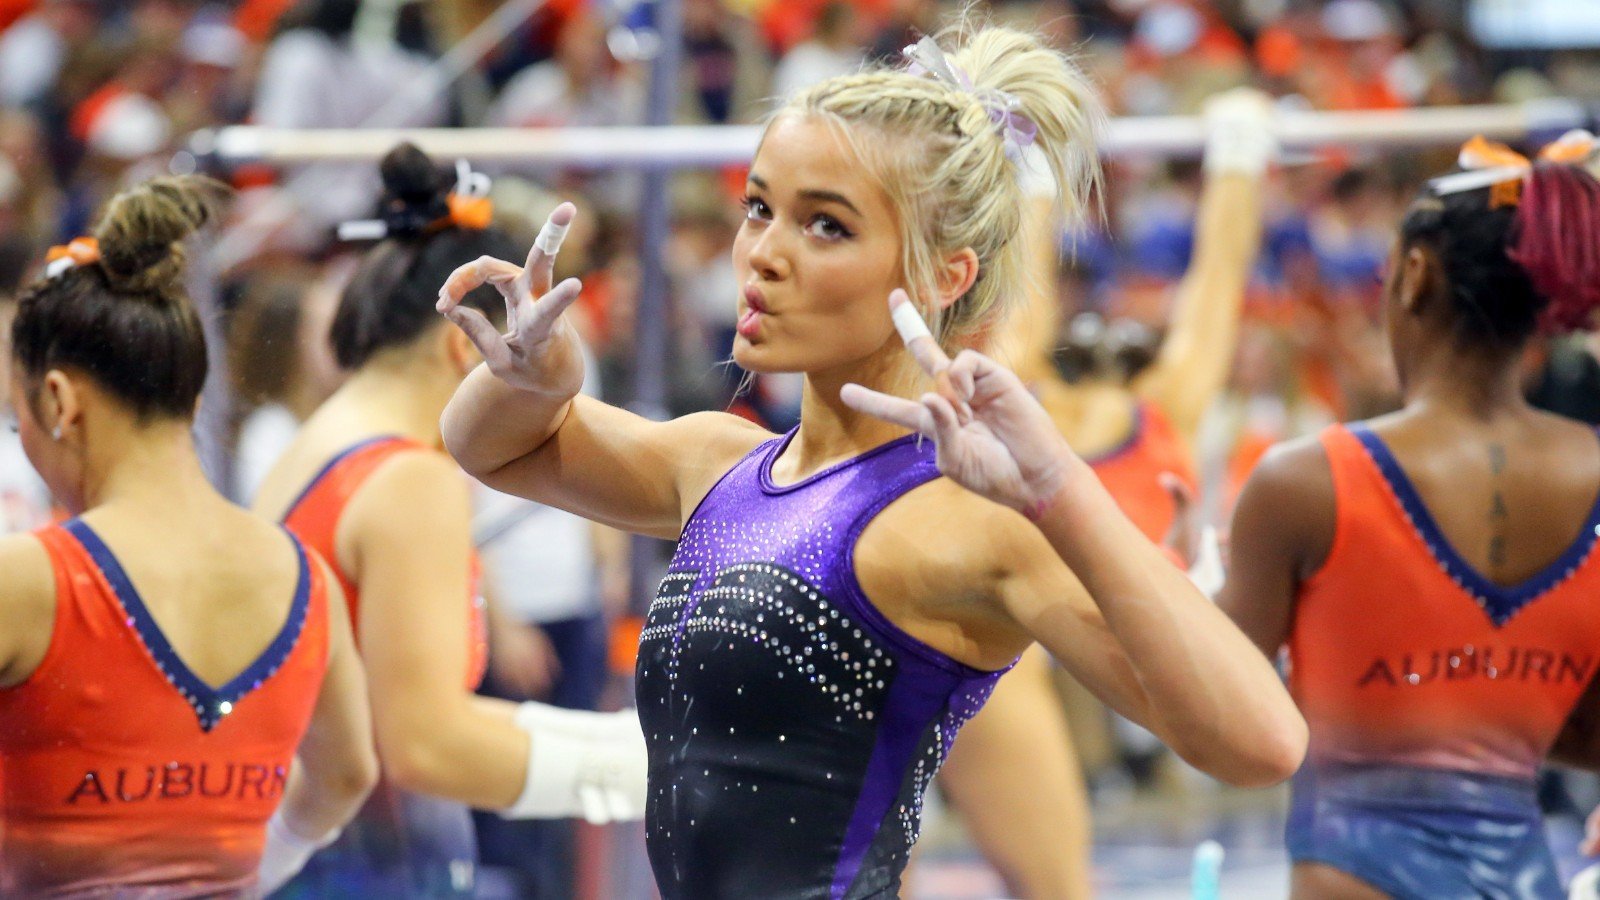 Olivia Dunne Shows Her Astonishing Flexibility In Tight Sportswear During LSU Gymnastics Workout